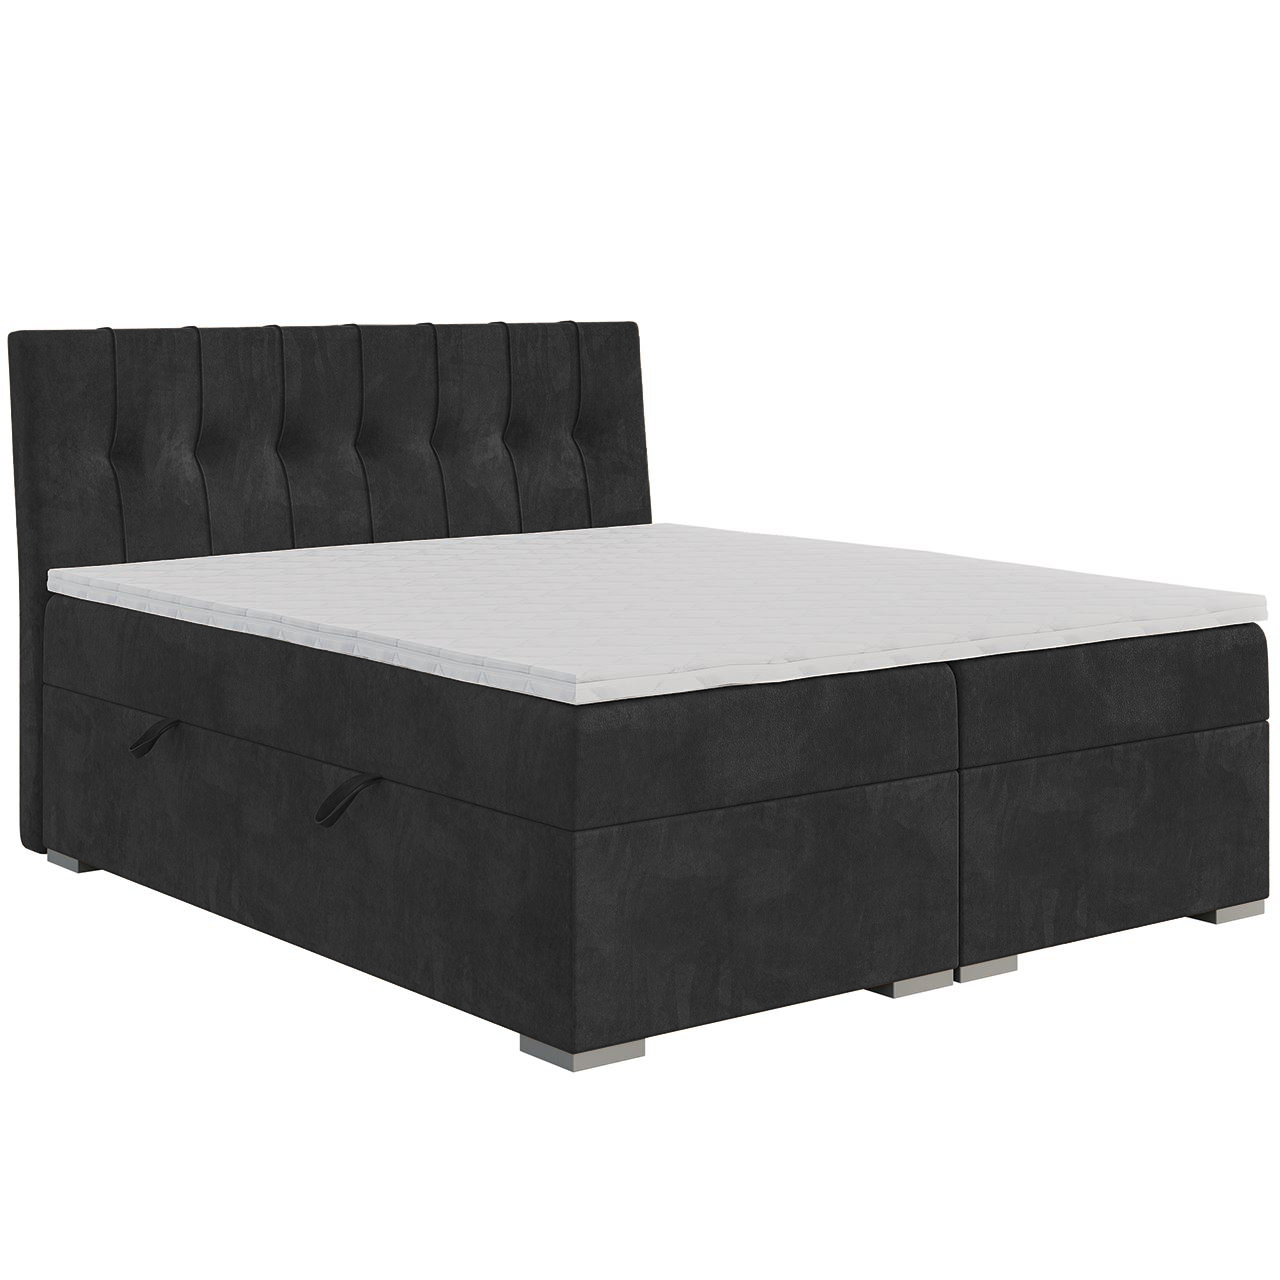 Upholstered bed DANO 120x200 riviera 97